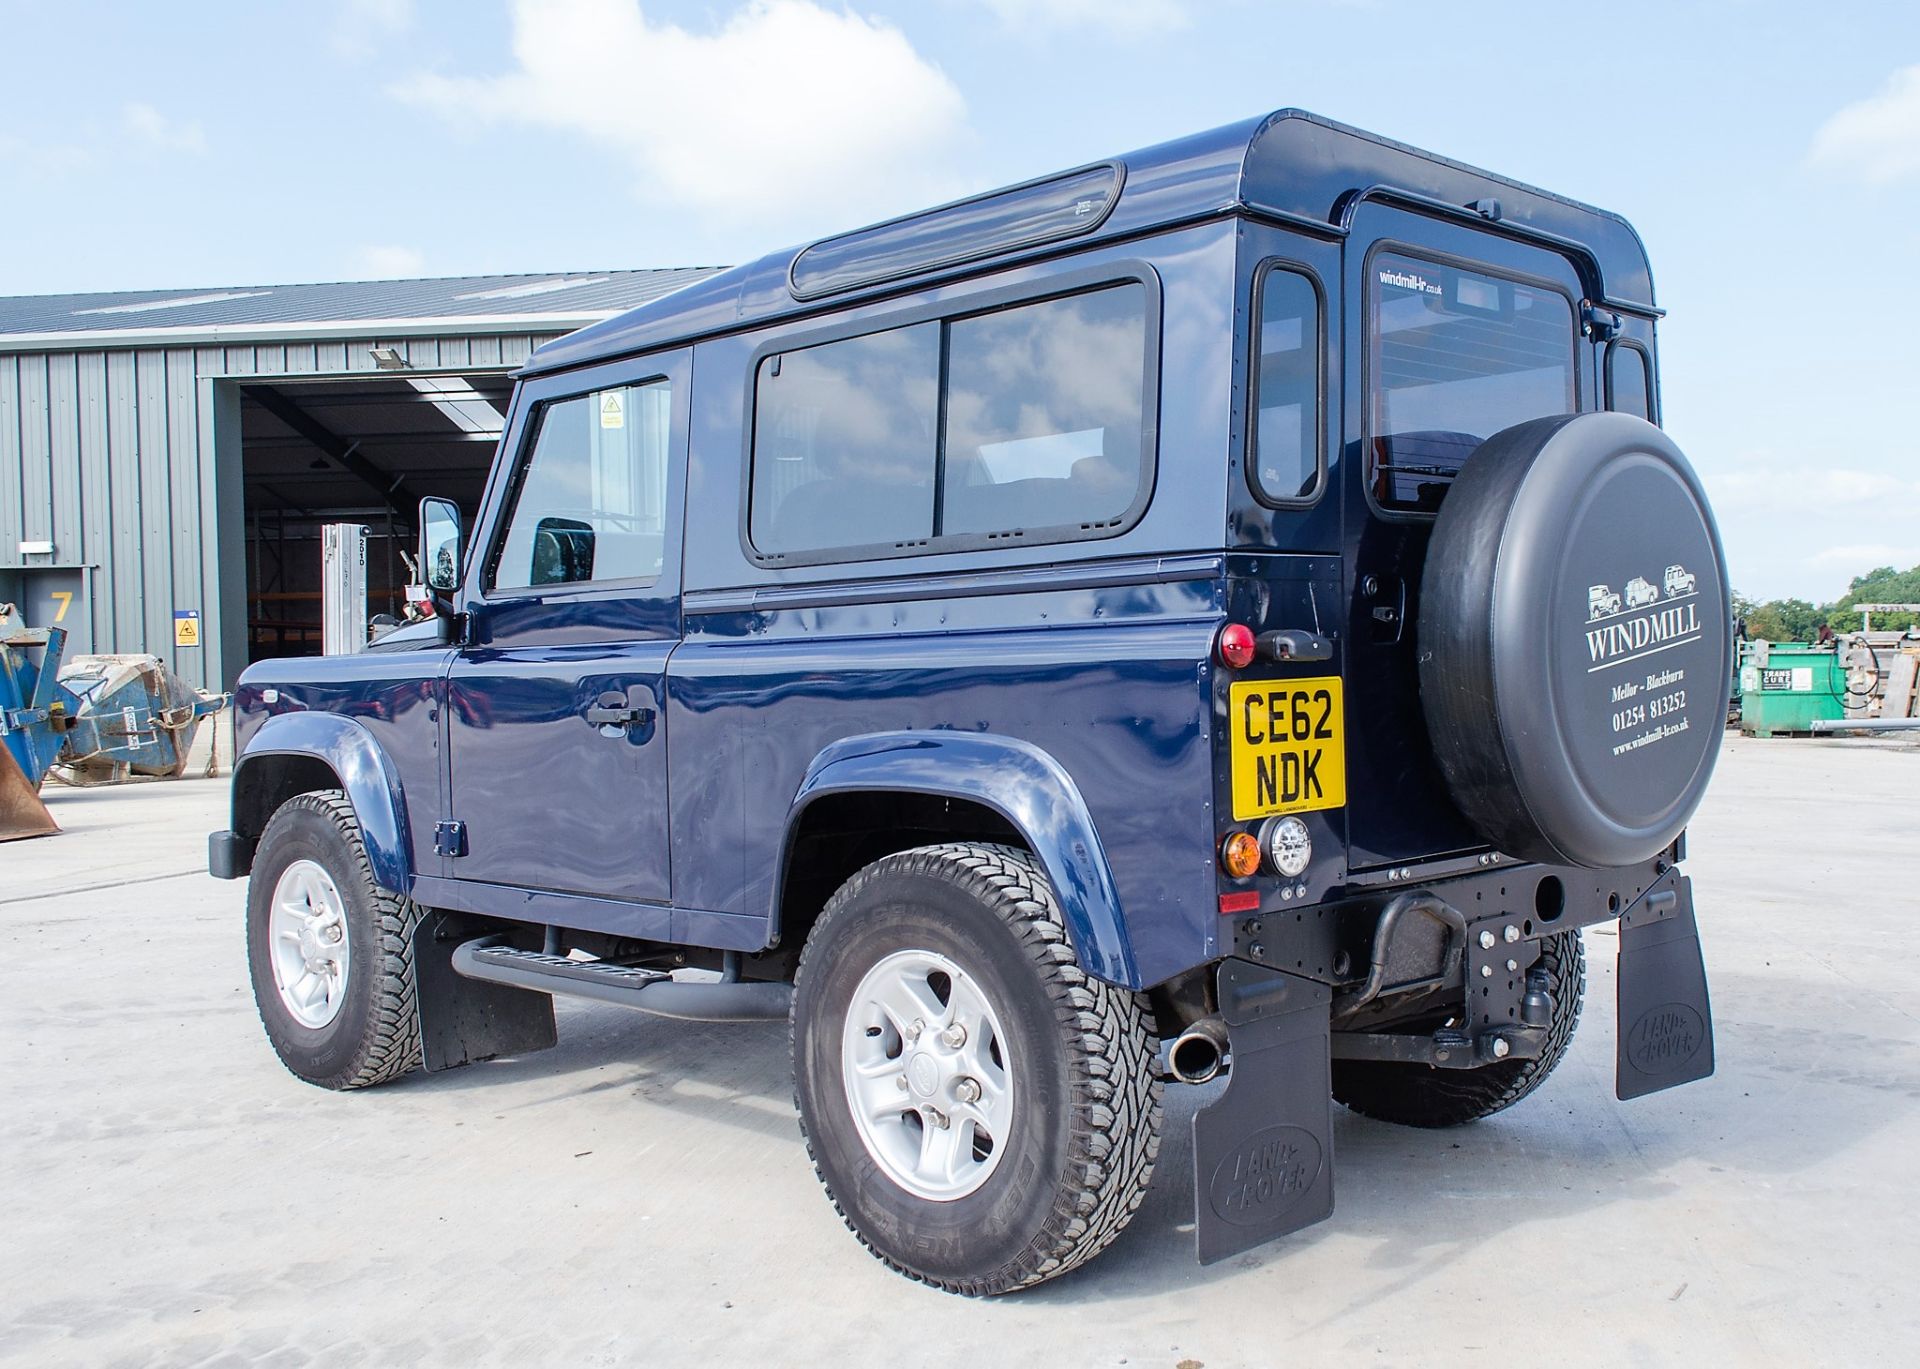 Landrover Defender 90 XS TD 2198cc 4x4 utility vehicle Registration Number: CE62 NDK Date of - Image 3 of 30